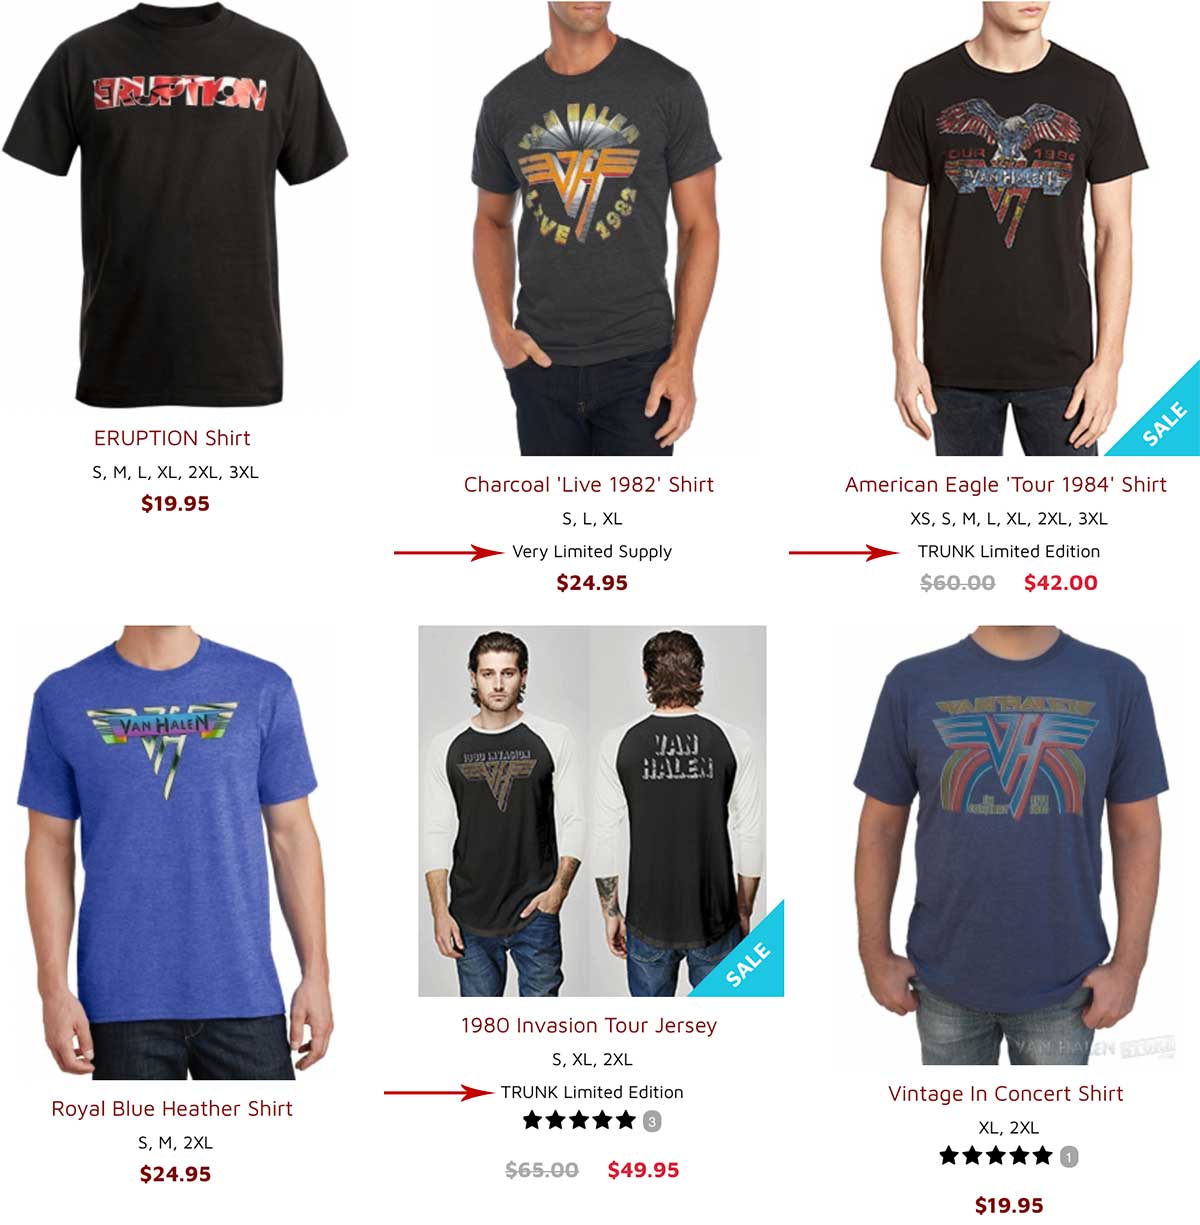 Category page of t-shirts. Under some are words telling shoppers available sizes, limited inventory and exclusives.